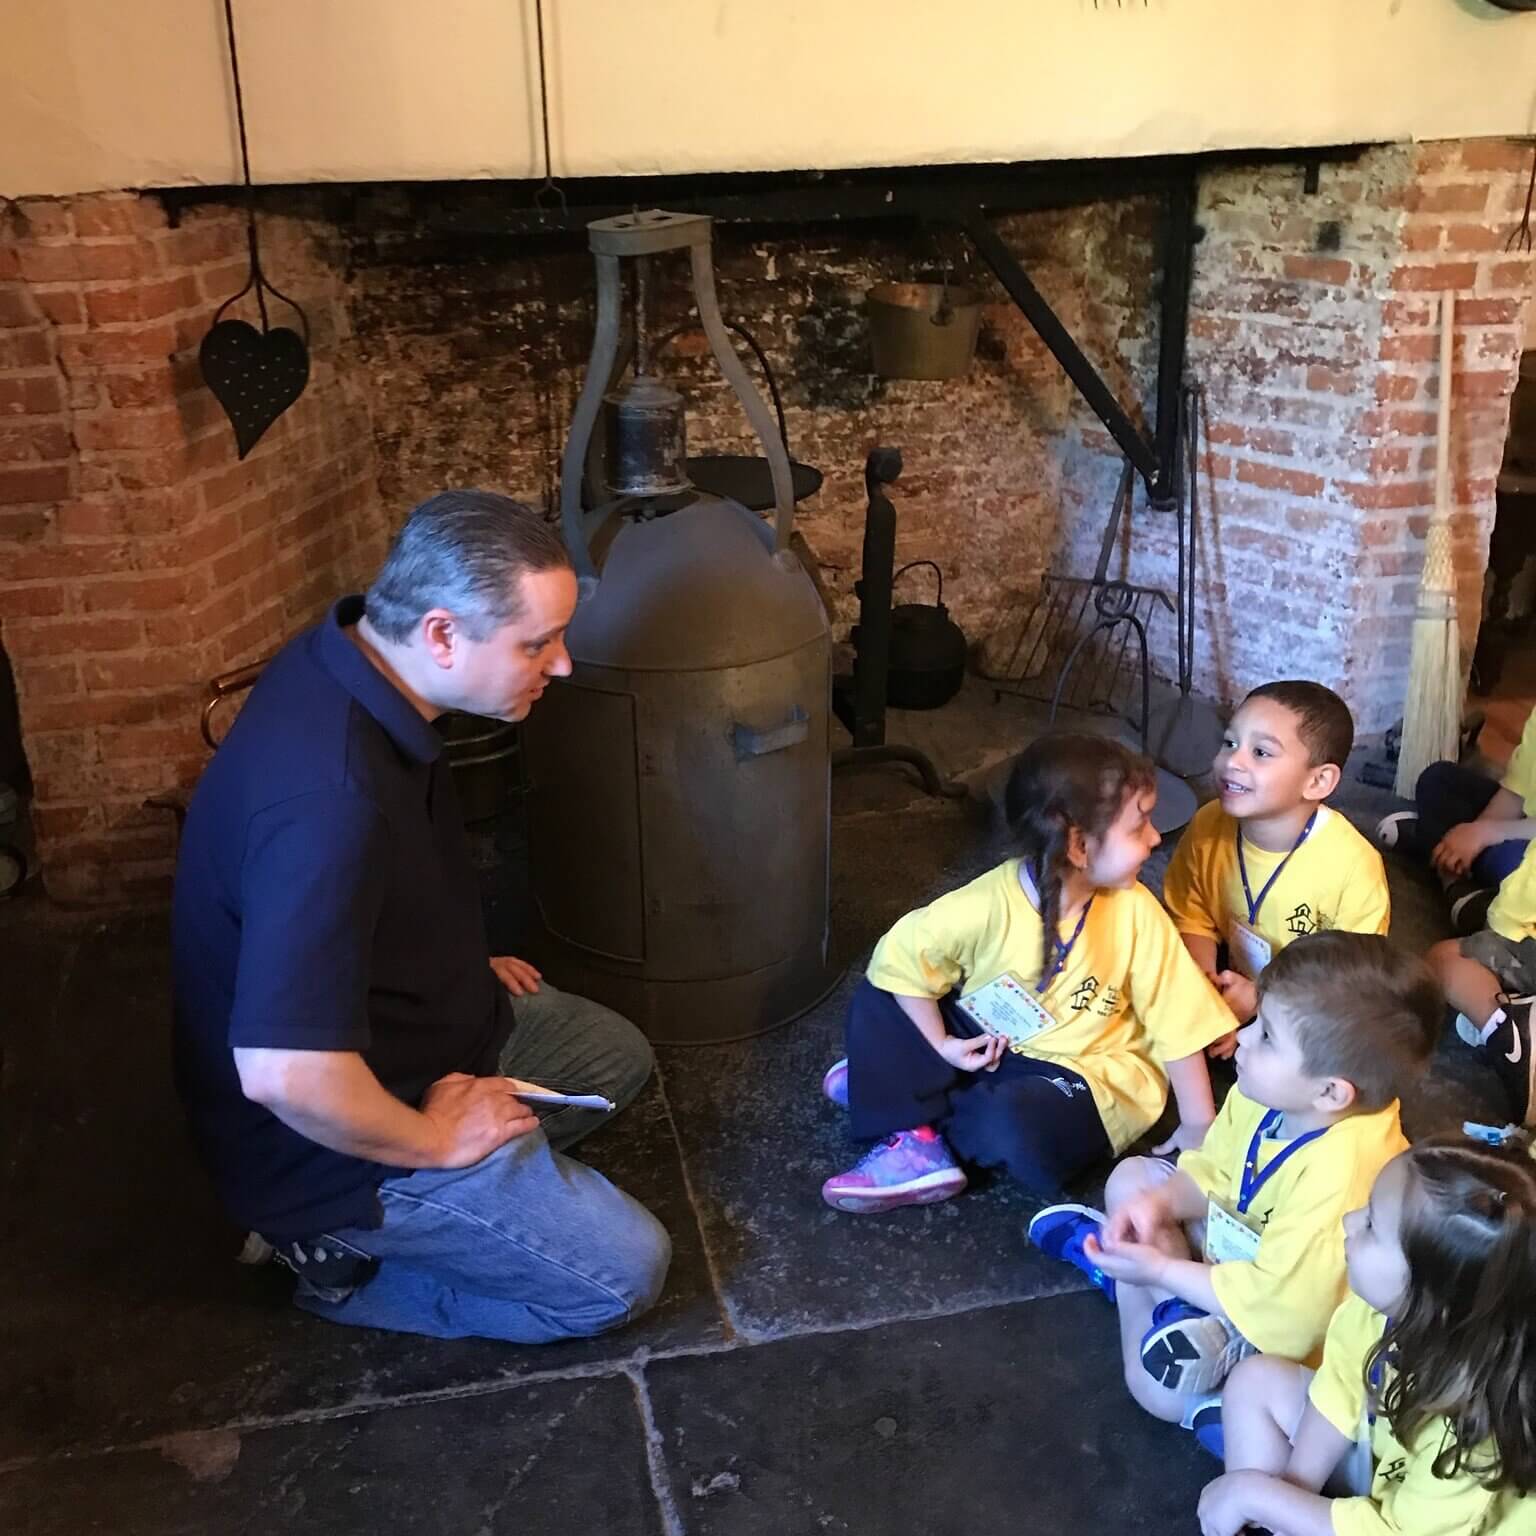 A group of young children wearing yellow t-shirts seated on the hearth in front of the antique fireplace. They are talking with a male curator.